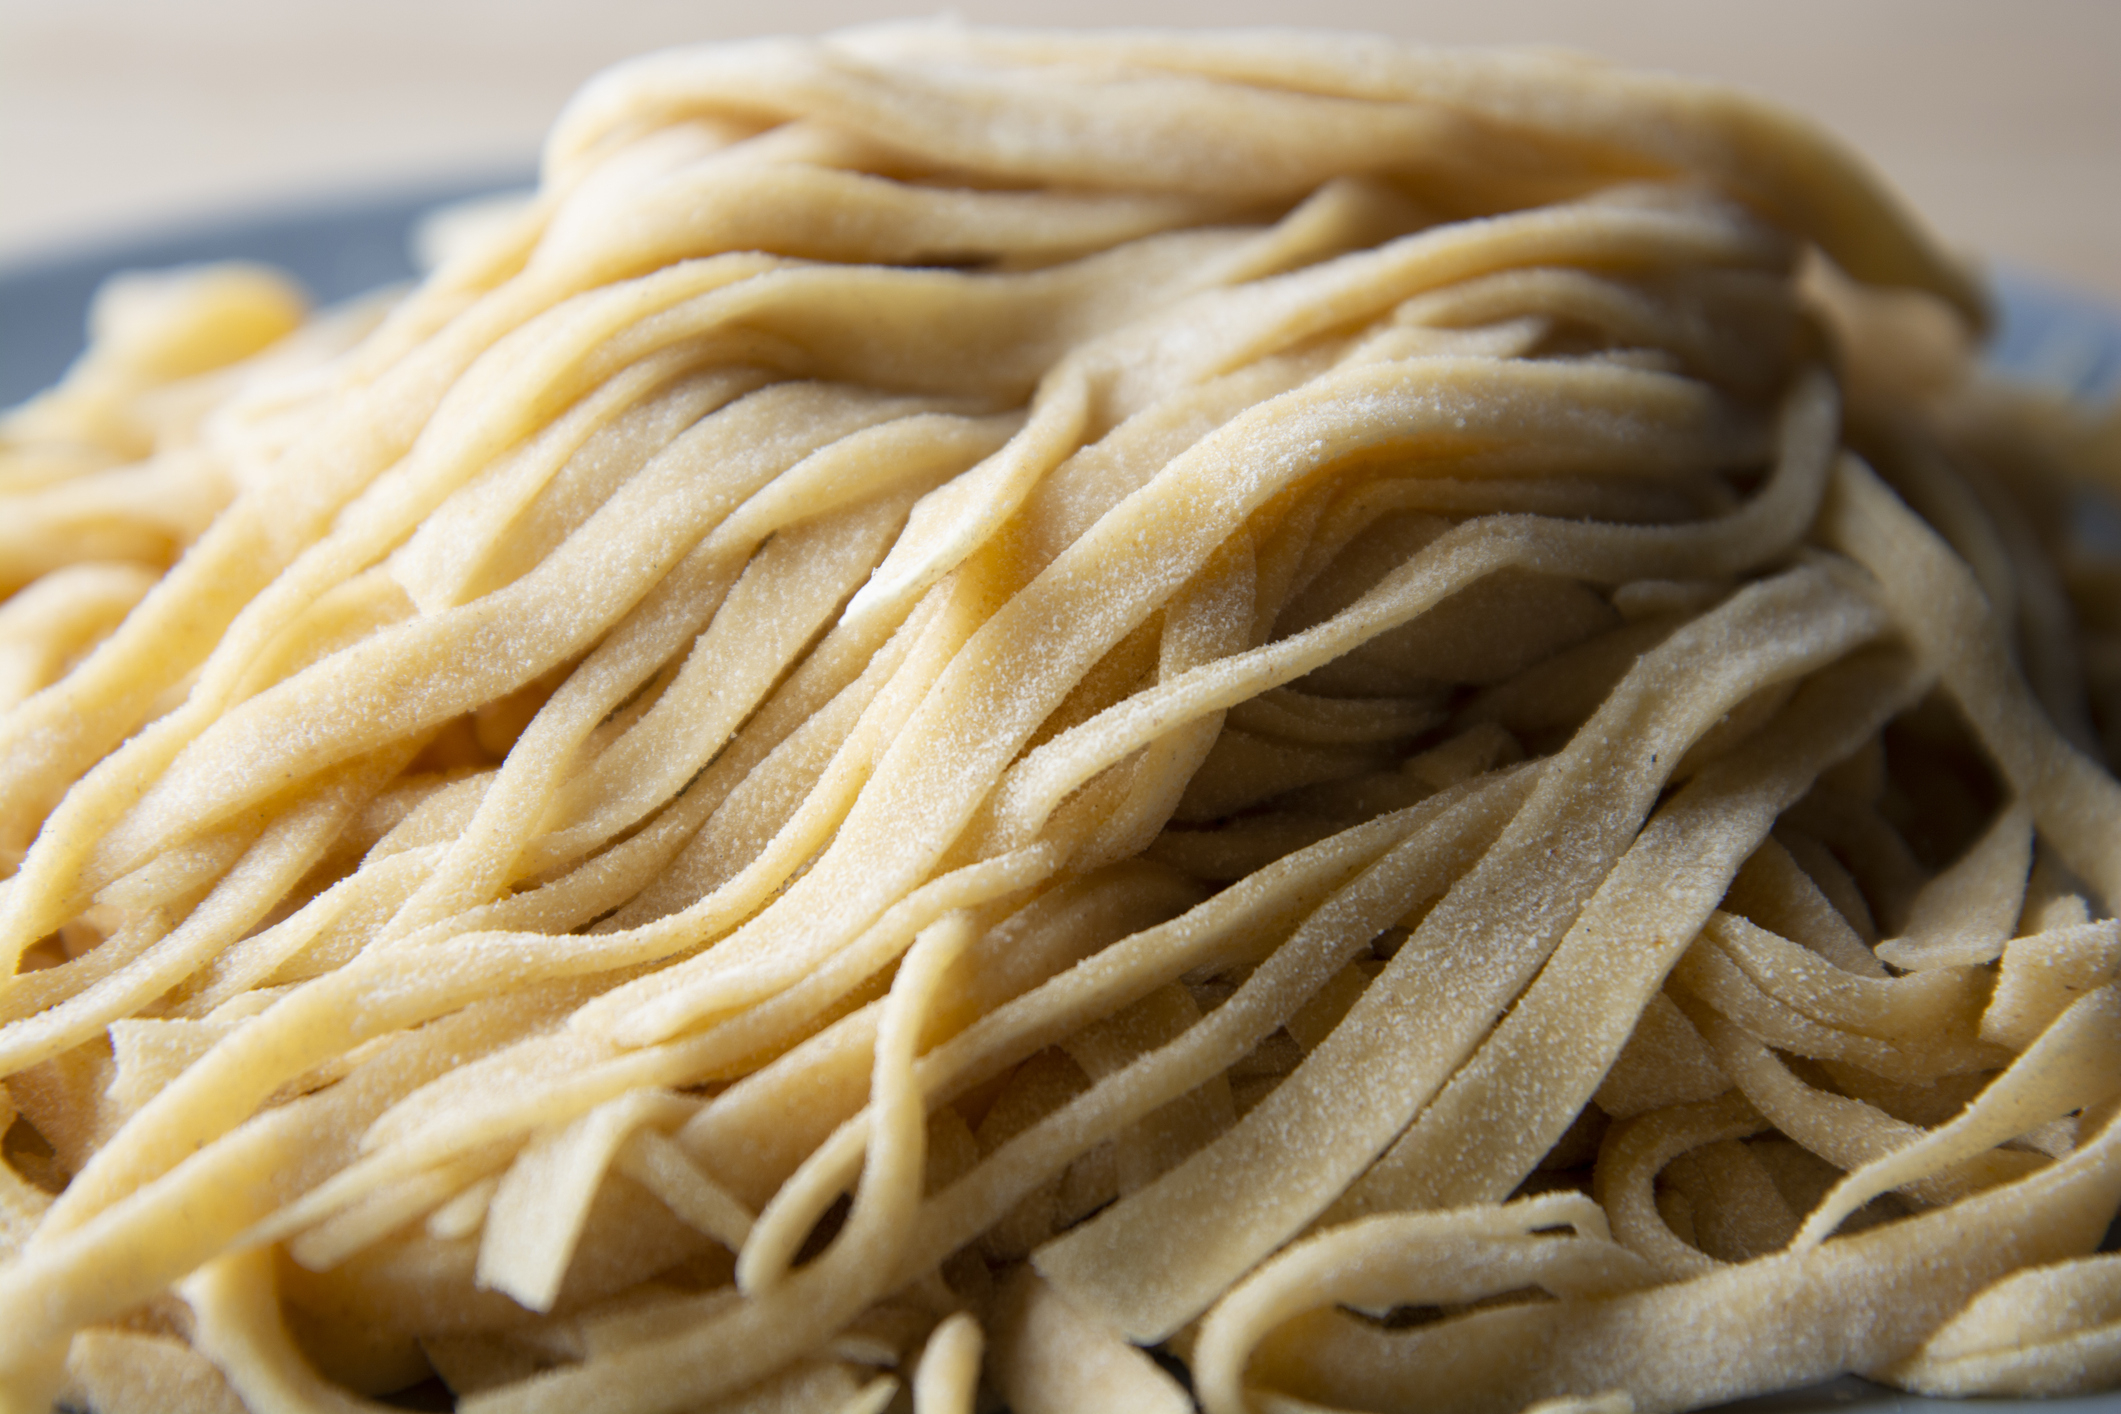 A close-up of a plate of uncooked, homemade pasta noodles